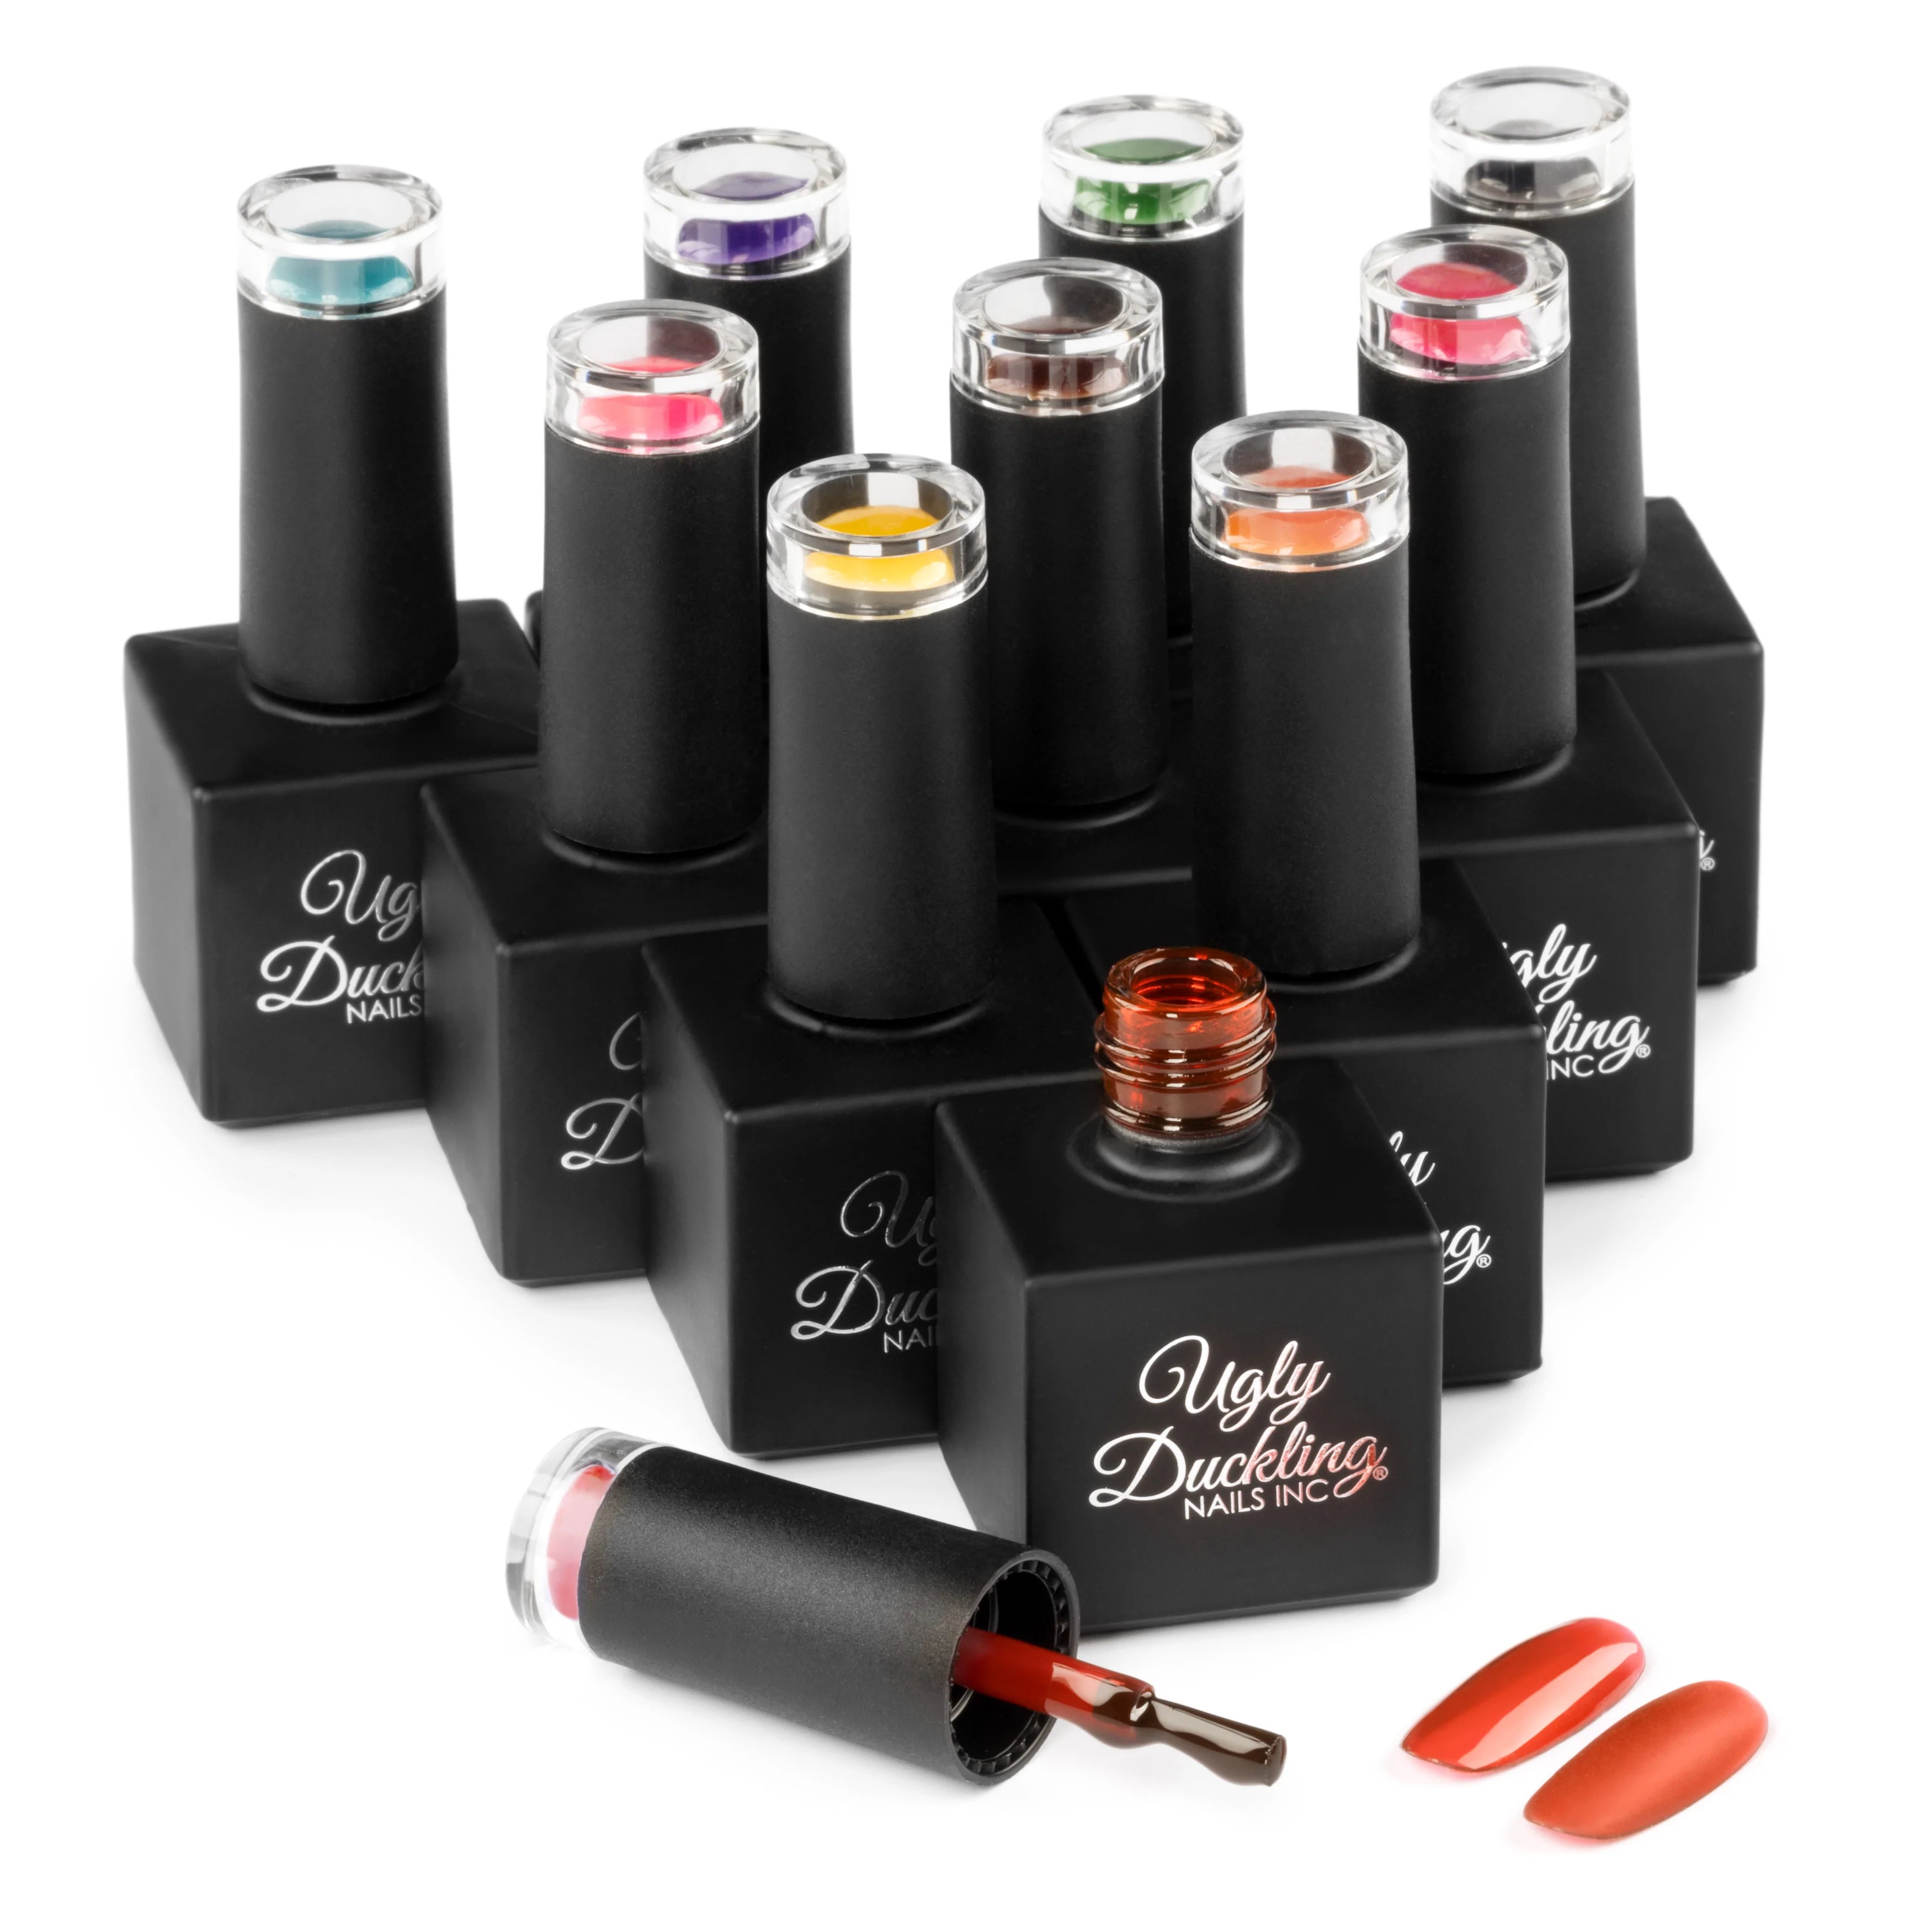 Ugly Duckling Gel Polish Kit - Gelly Polish Collection - Creata Beauty - Professional Beauty Products